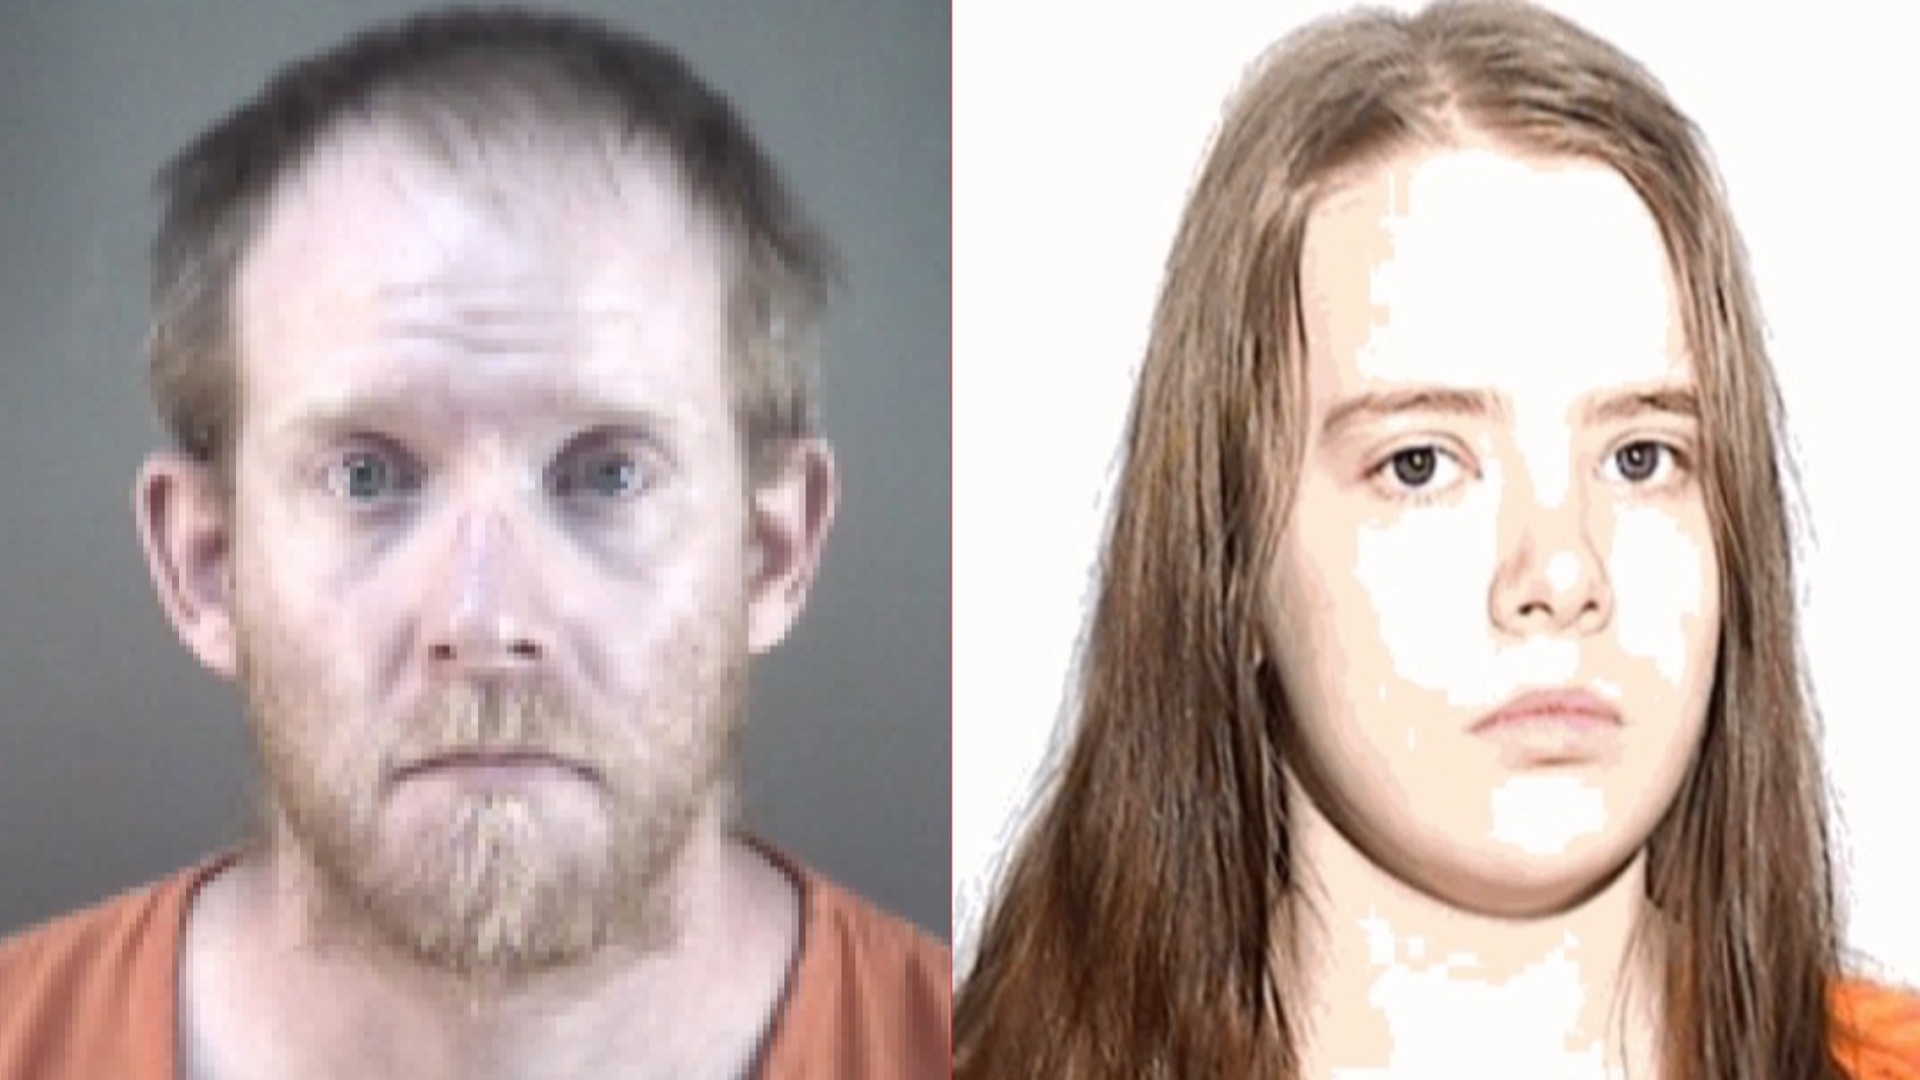 Jonathon Jones and Kaitlyn Coones pleaded no contest Tuesday to aggravated murder and abuse of corpse charges in the 2023 death of Jonathon's mother, Nicole Jones.